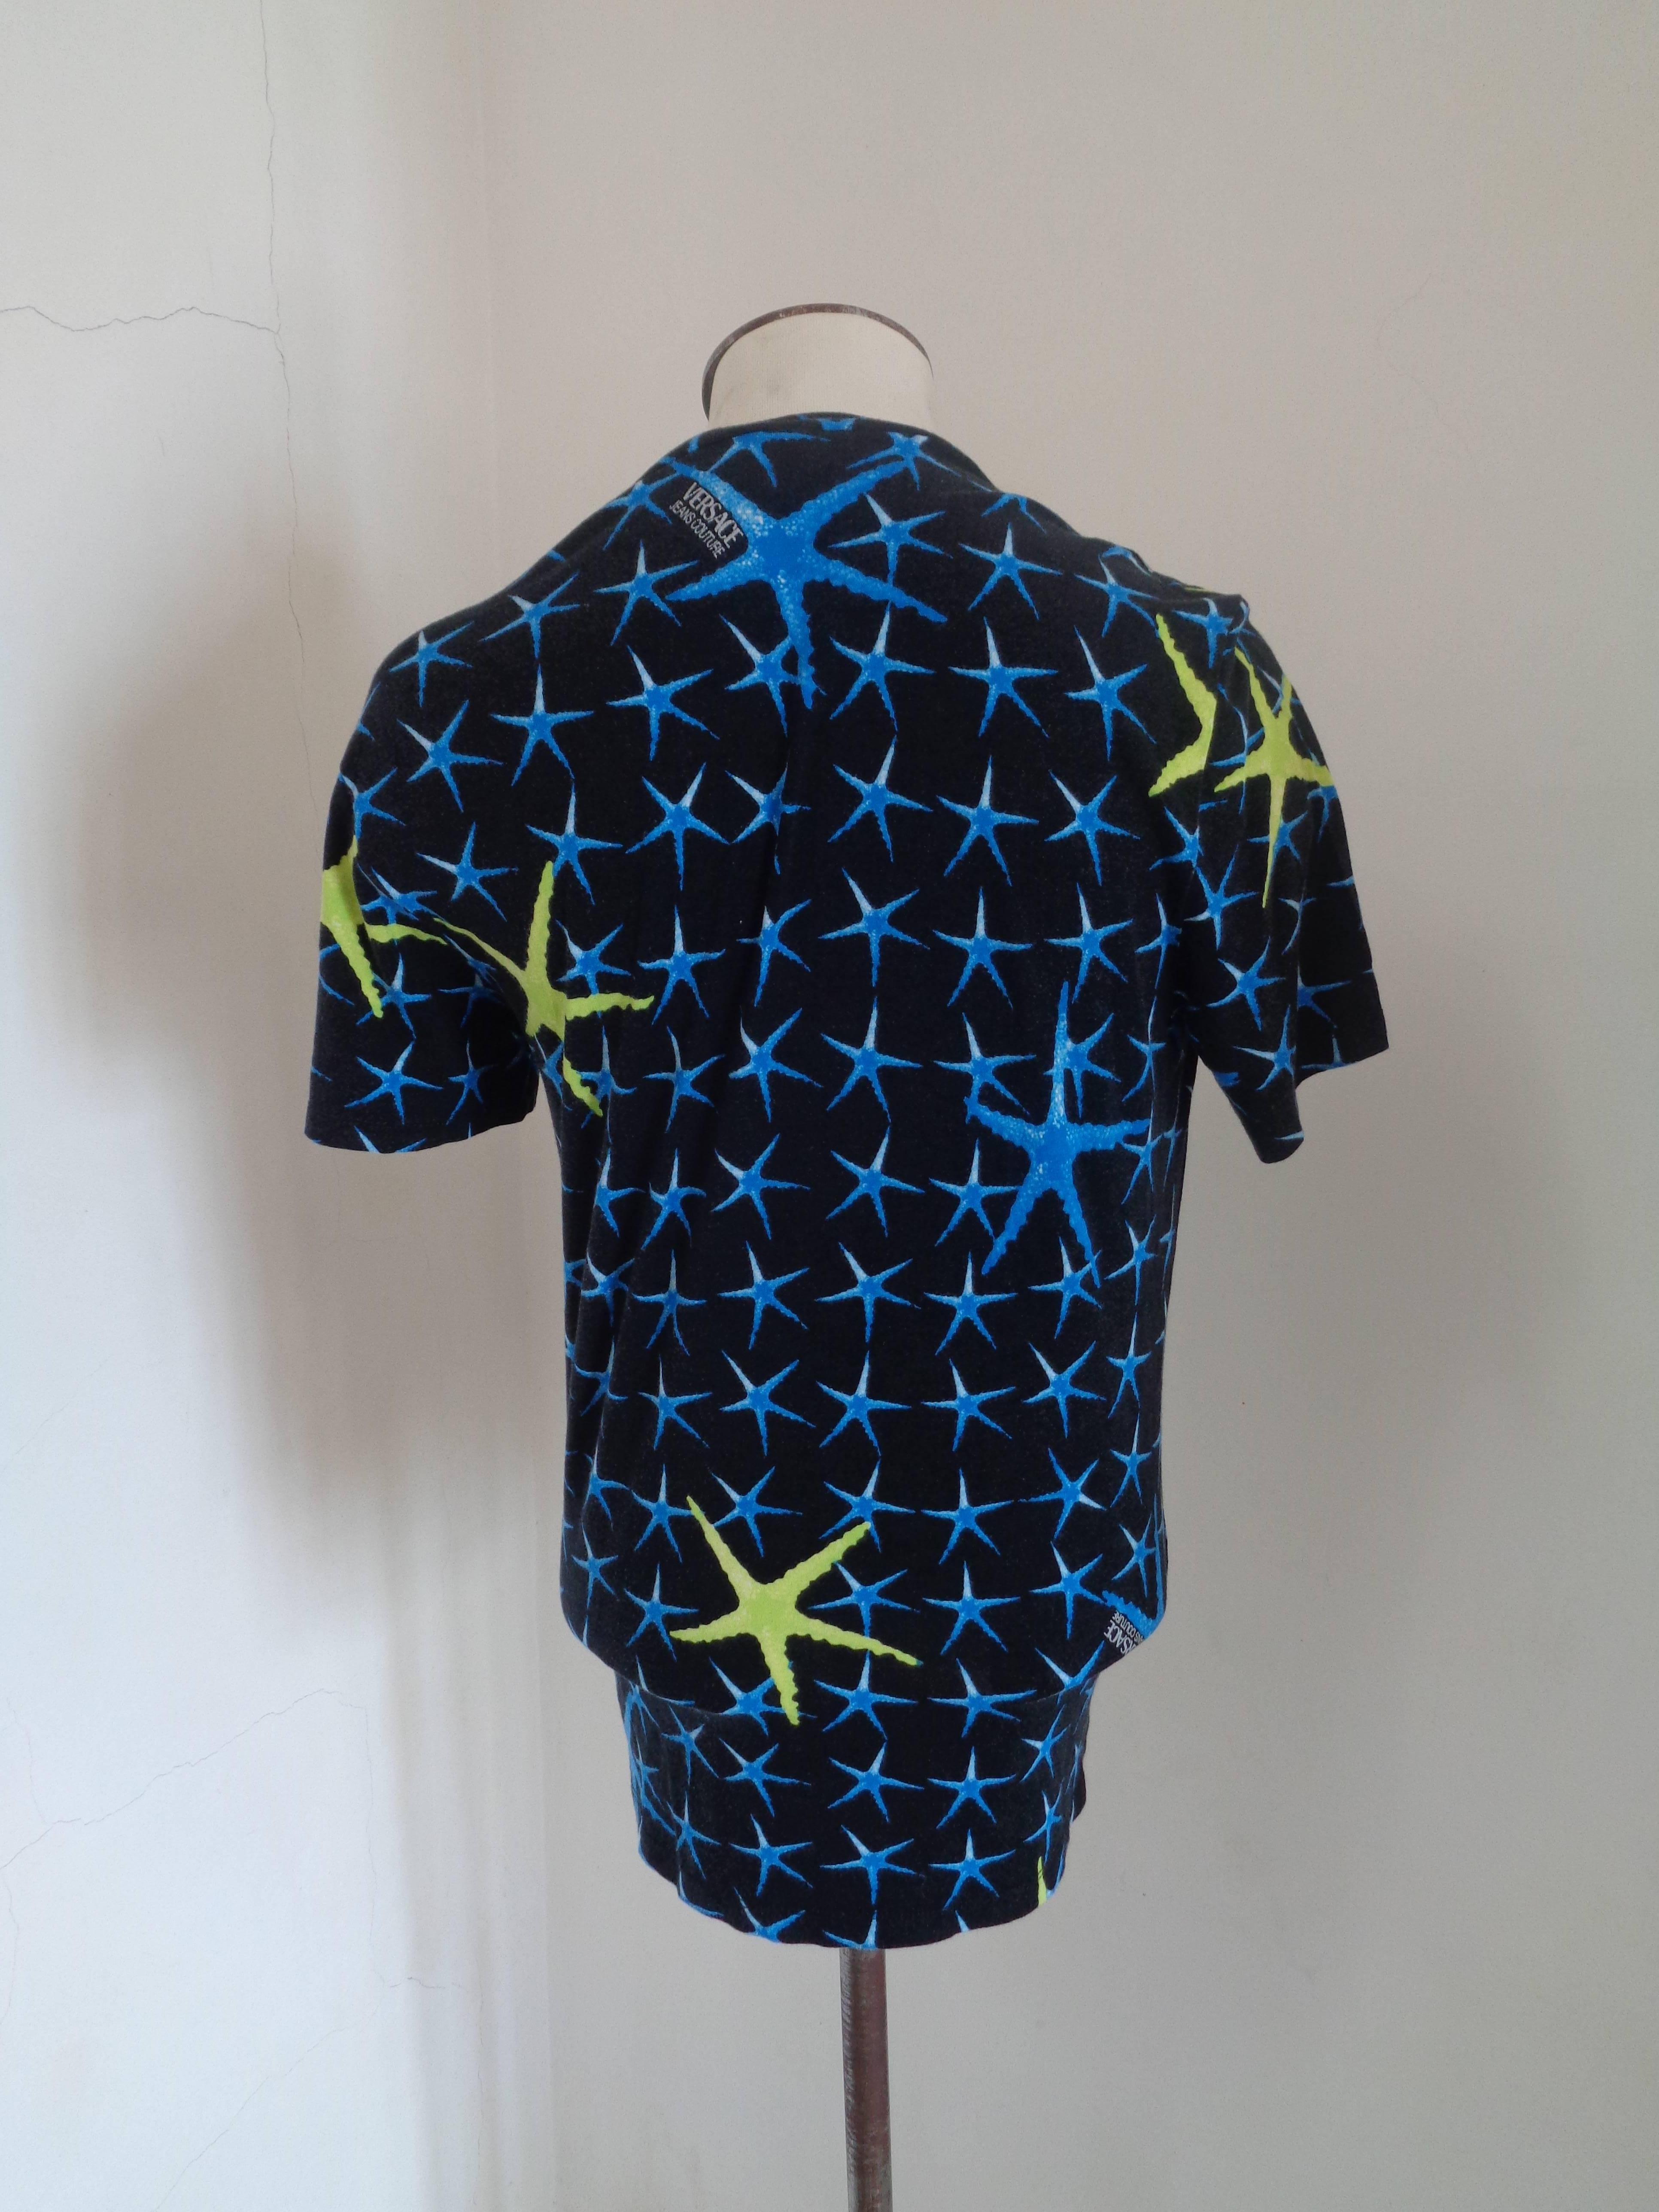 Versace Blu Stars Cotton Shirt

Totally made in italy in size L 

